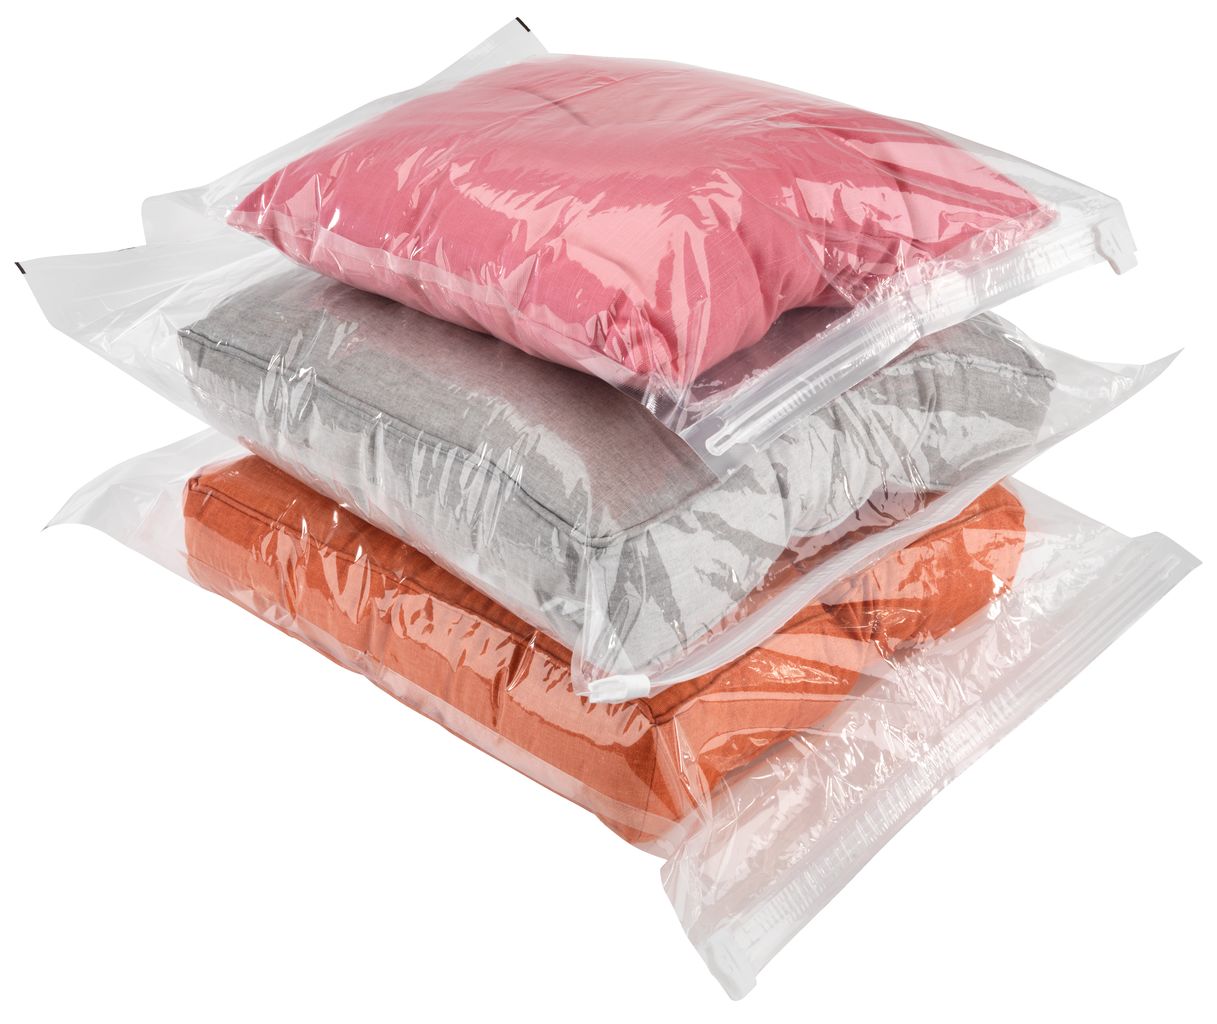 Buy 11 PCS Vacuum bags for Clothes Clothing 70CMx100CM Online - Shop  Cleaning & Household on Carrefour UAE